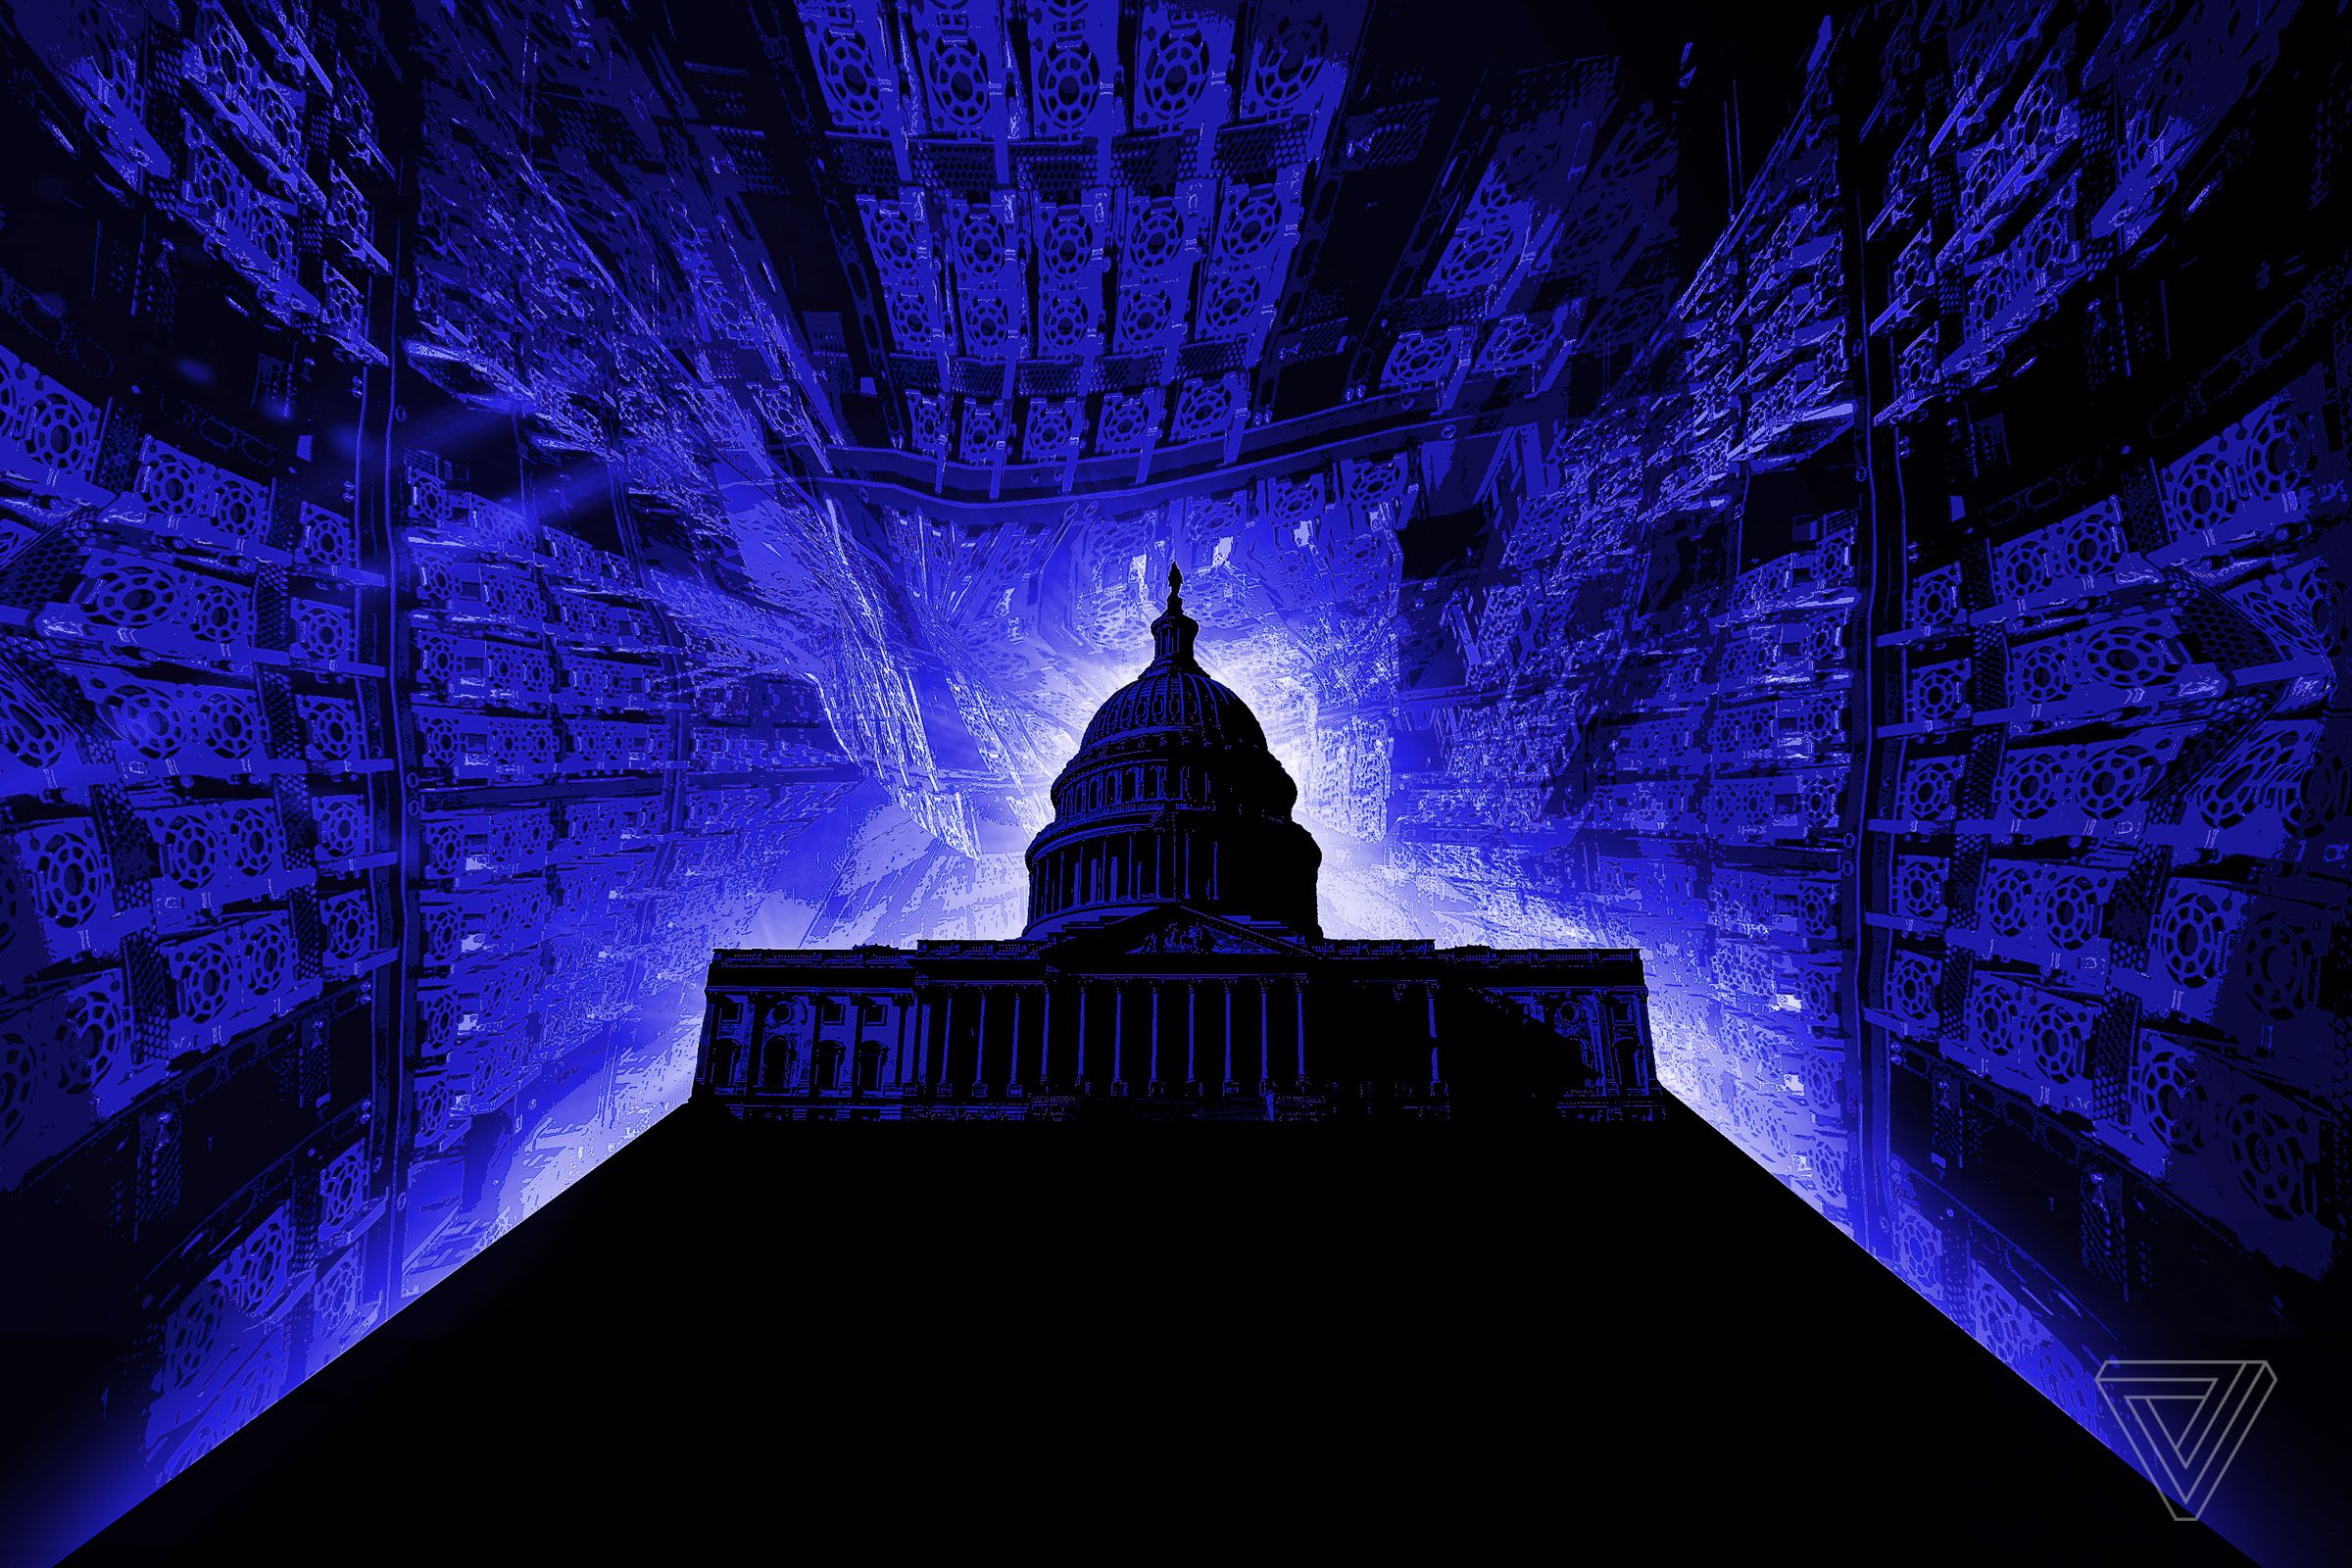 Illustration of the Capitol building with a blue filter.